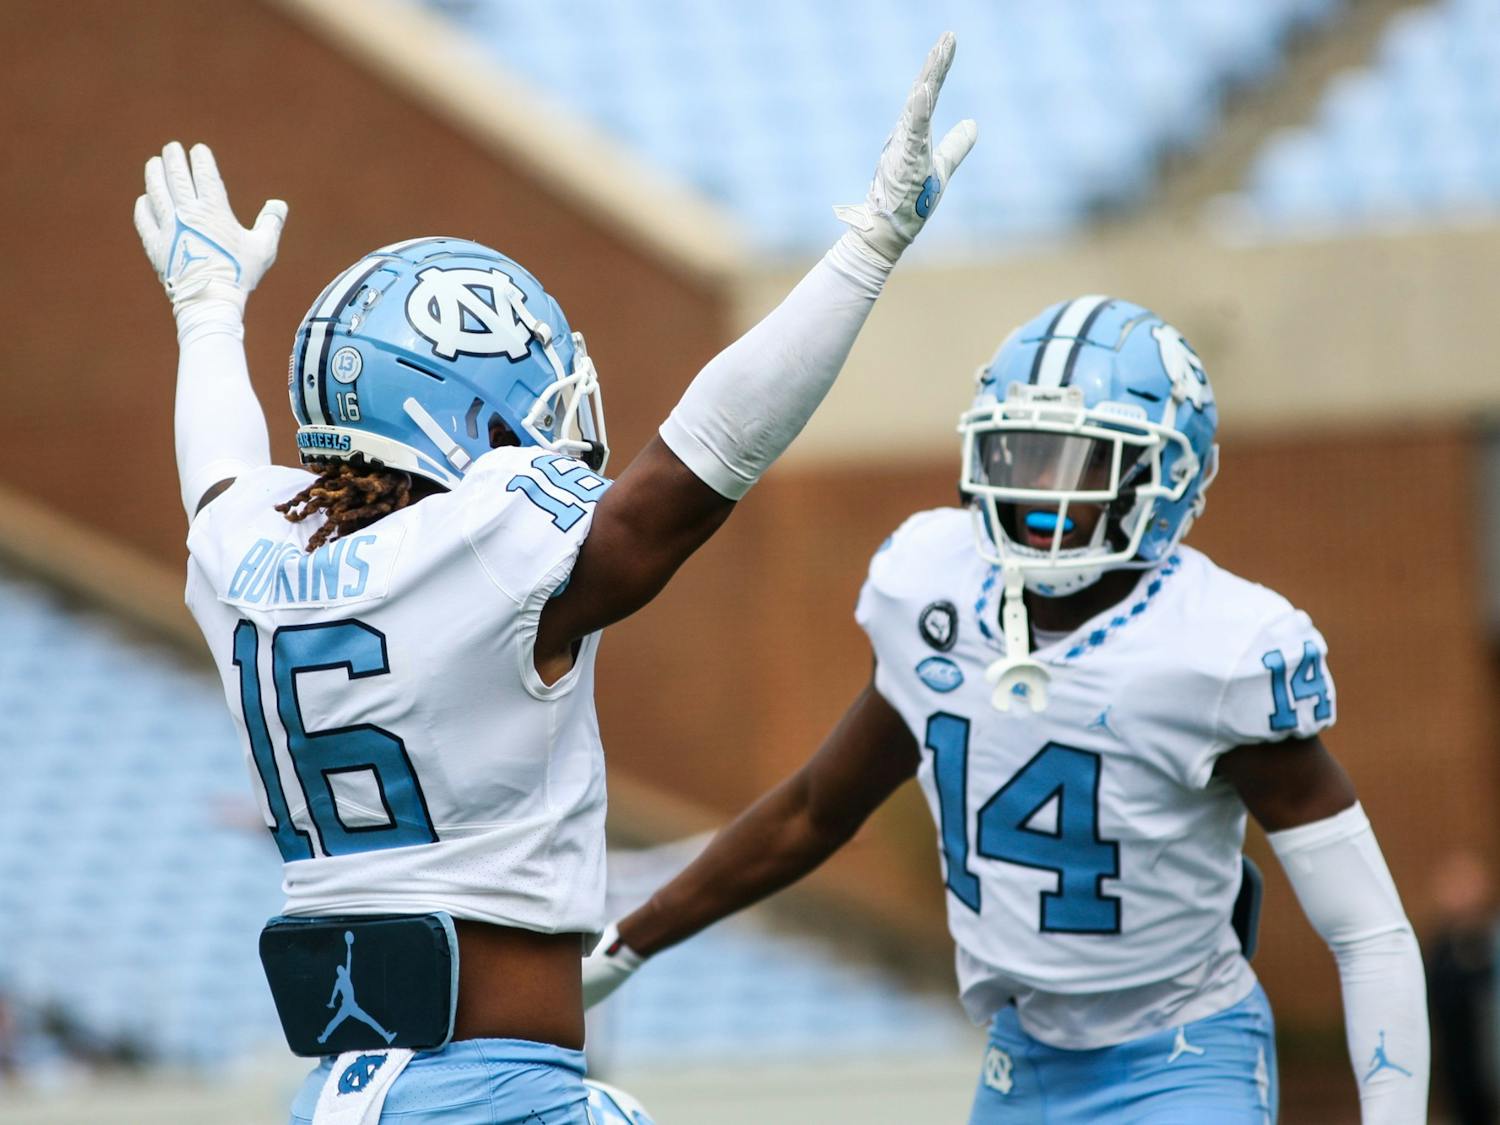 Redshirt freshman defensive back Dontae Balfour (14) and sophomore defensive back Deandre Boykins (16) celebrate a complete pass during the Spring Game on Saturday, April 9, 2022. The Tar Heels and Carolina tied, 14-14.